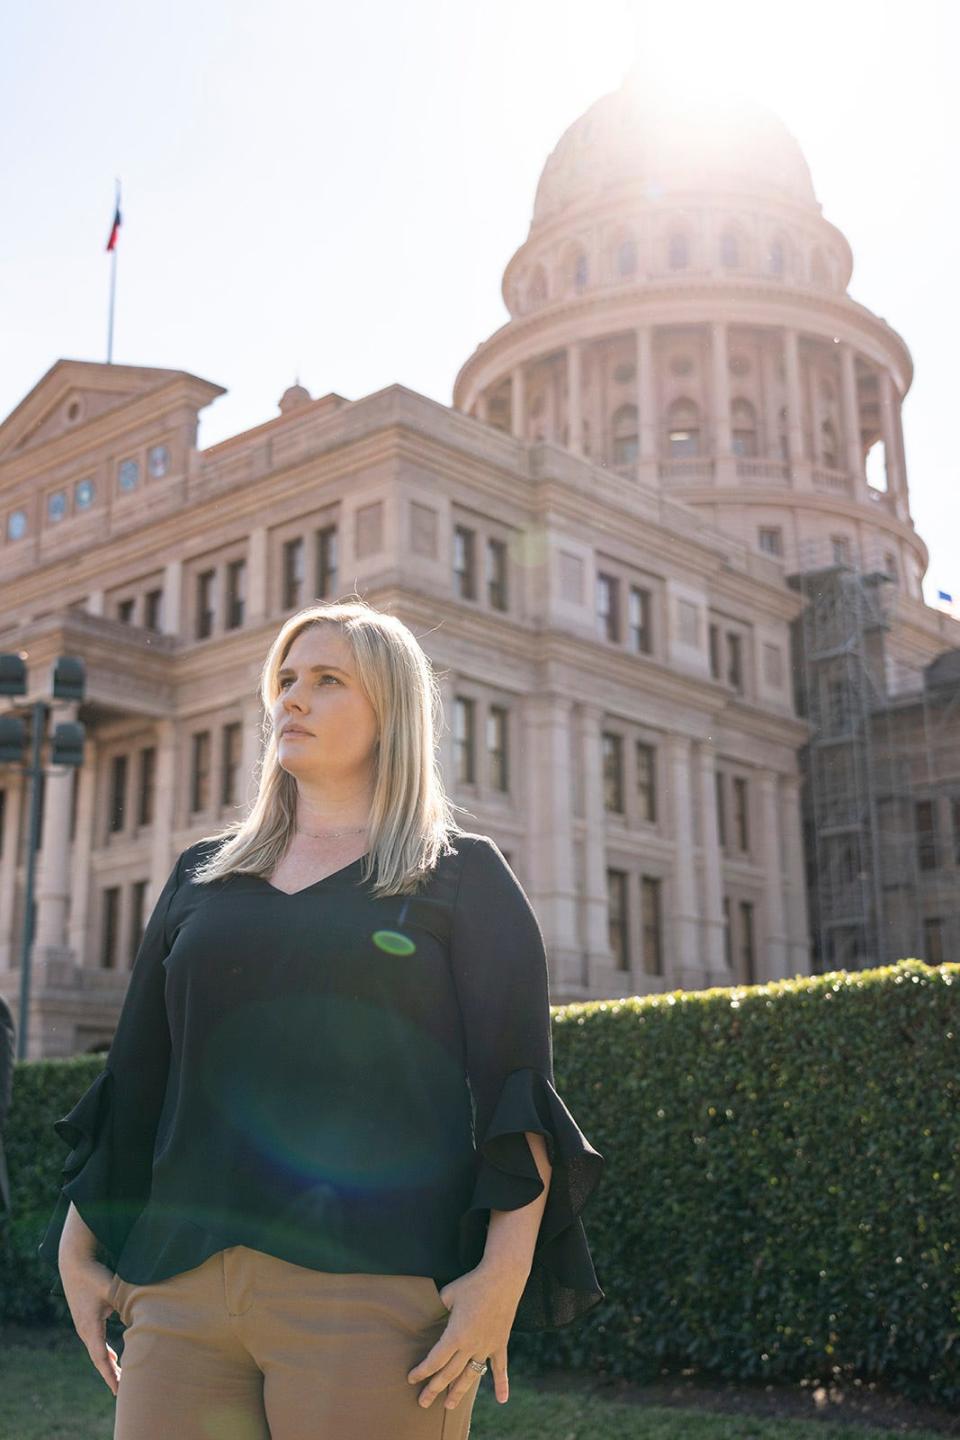 Kaitlyn Kash, one of 20 women who were denied abortions despite severe pregnancy complications, stands in front of the Capitol after the Texas Supreme Court heard oral arguments in the case, Zurawski v. State of Texas, last month.